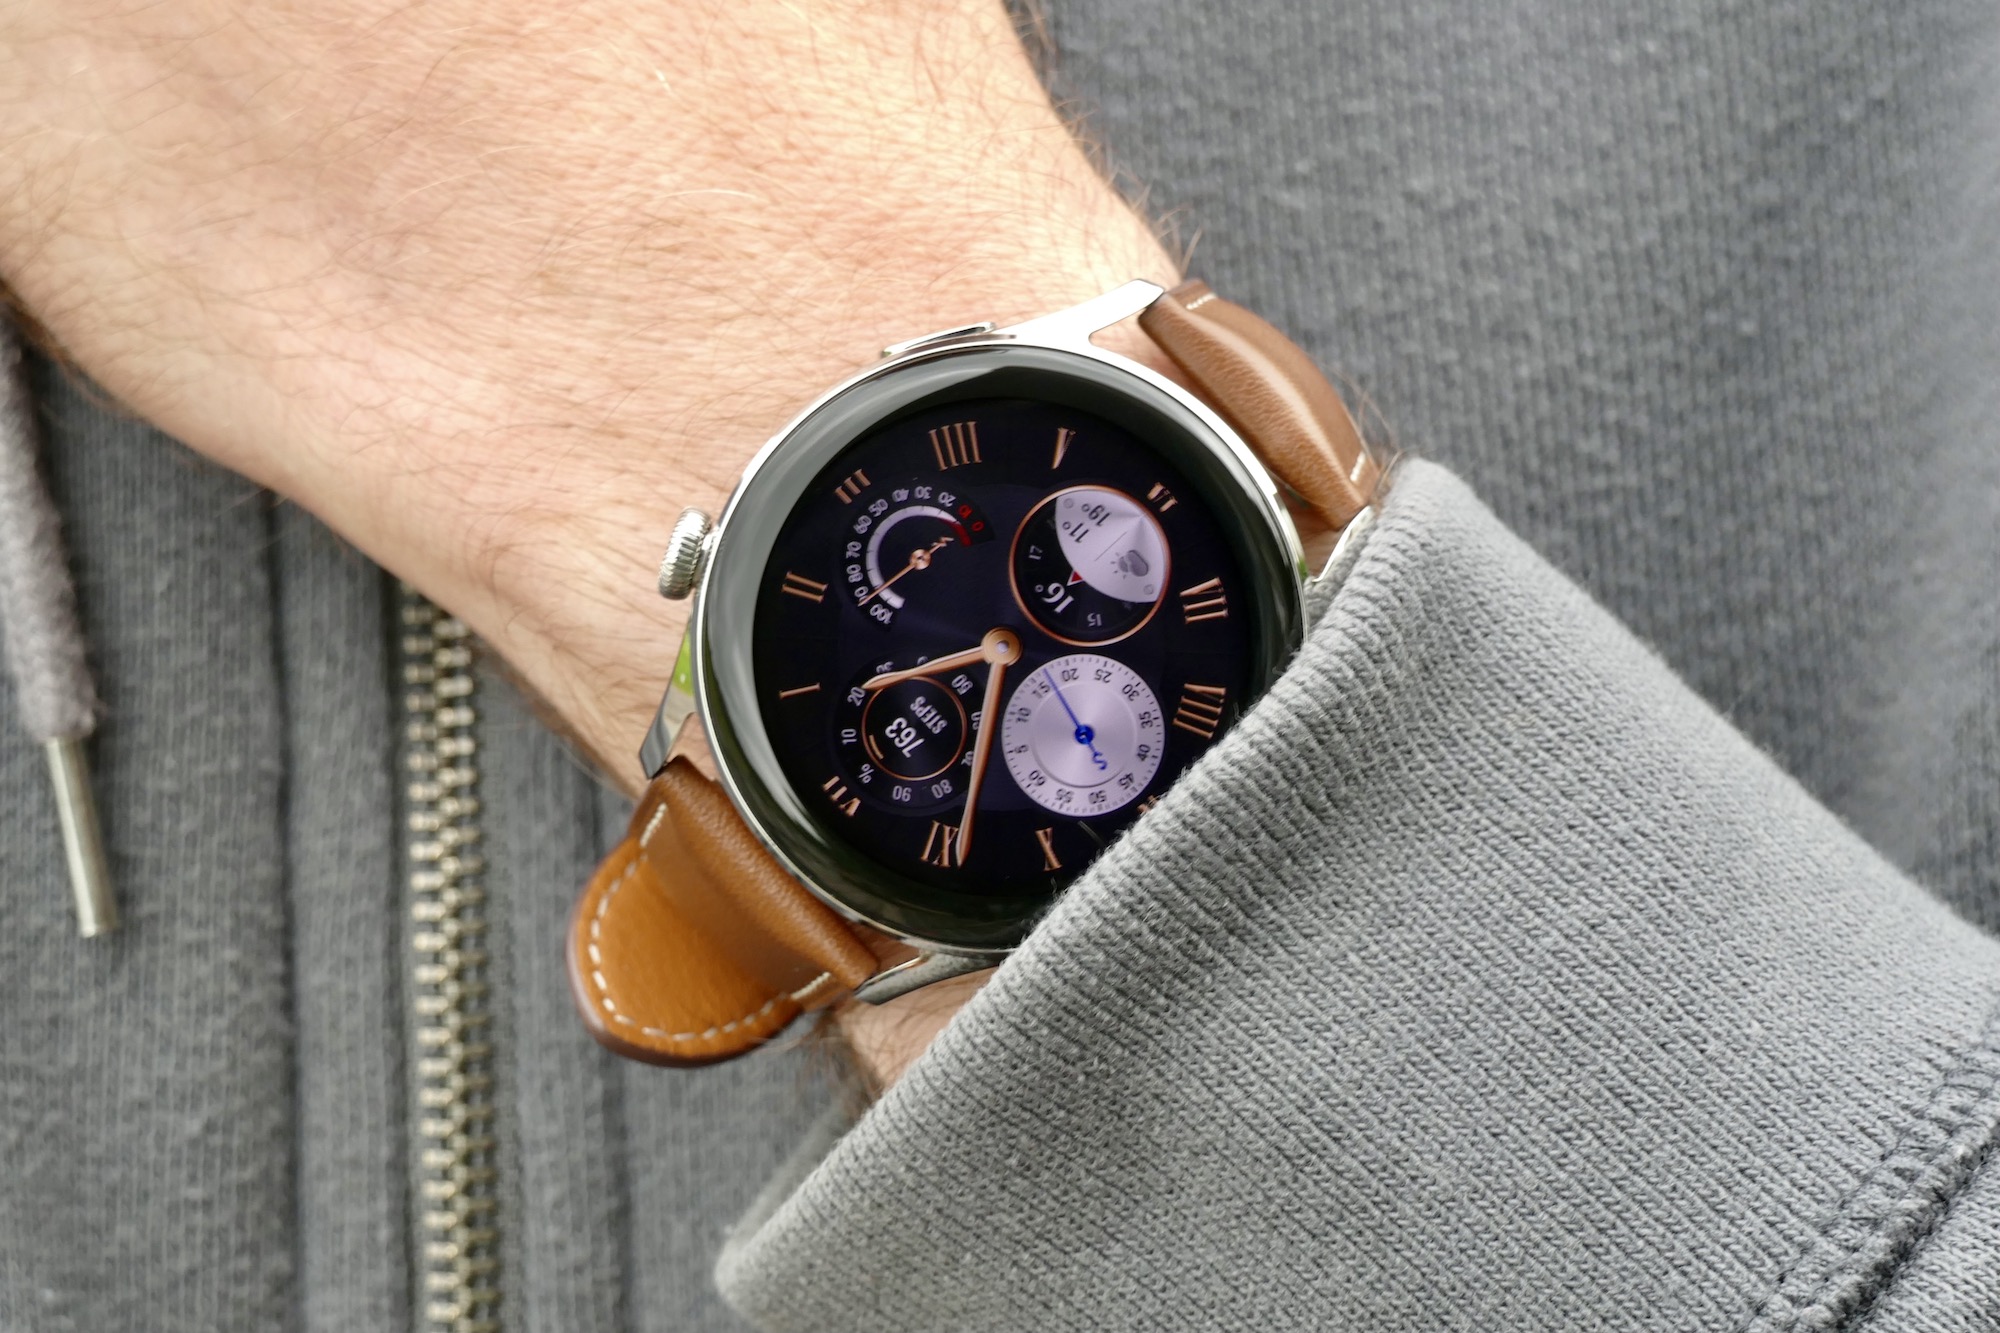 The ULTIMATE Smartwatch? Huawei Watch Ultimate Hands-On Review 